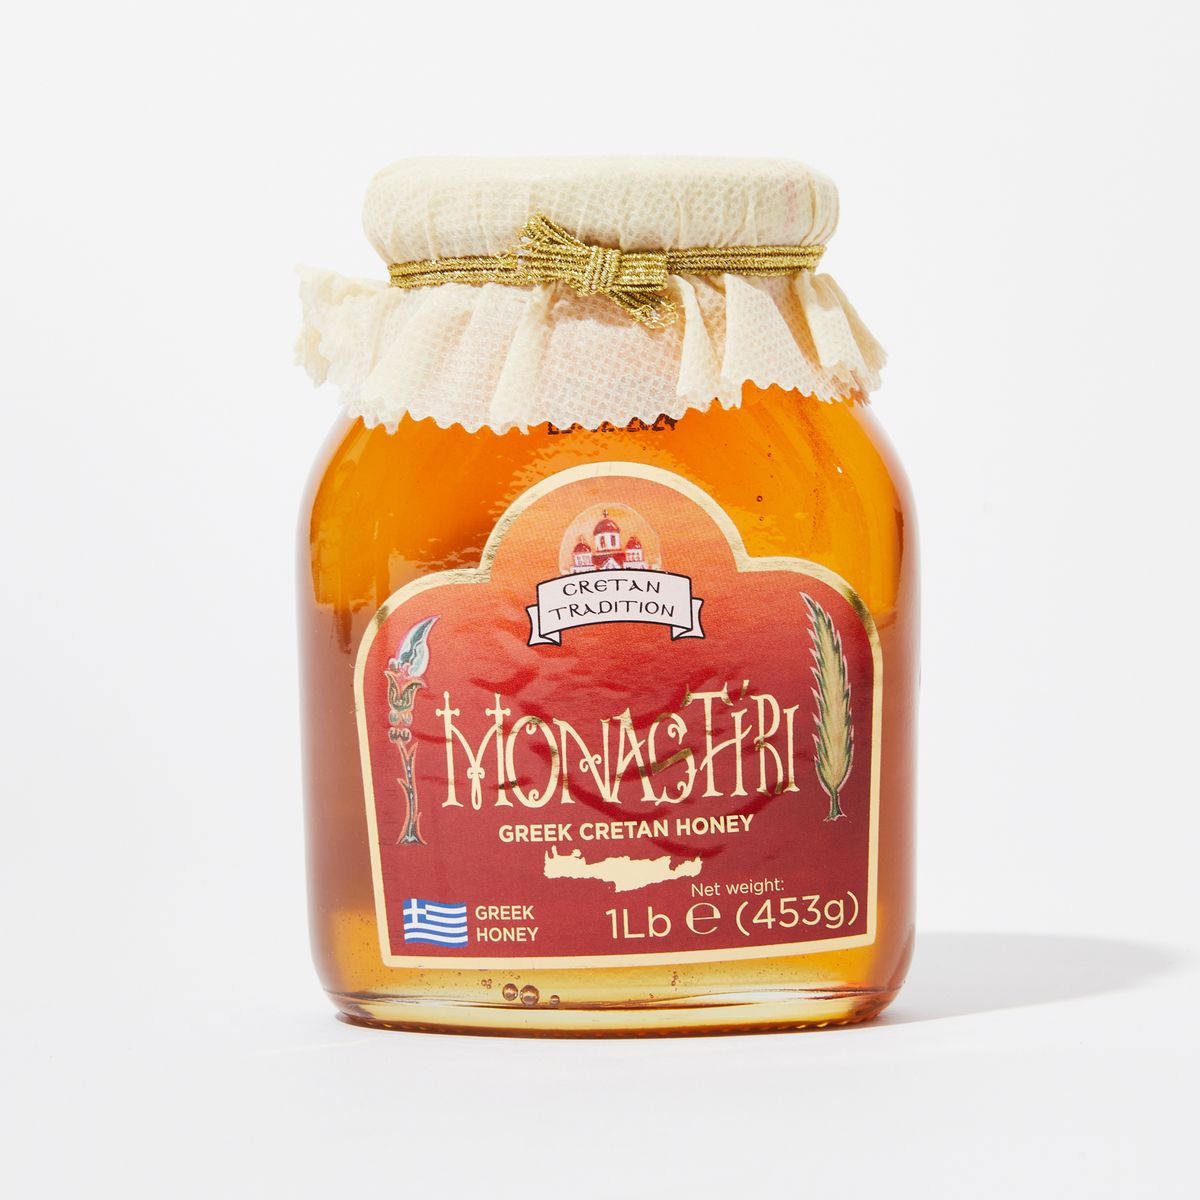 A clear jar full of golden honey with fabric tied around the lid and a red label that reads "Monastiri Greek Cretan Honey"